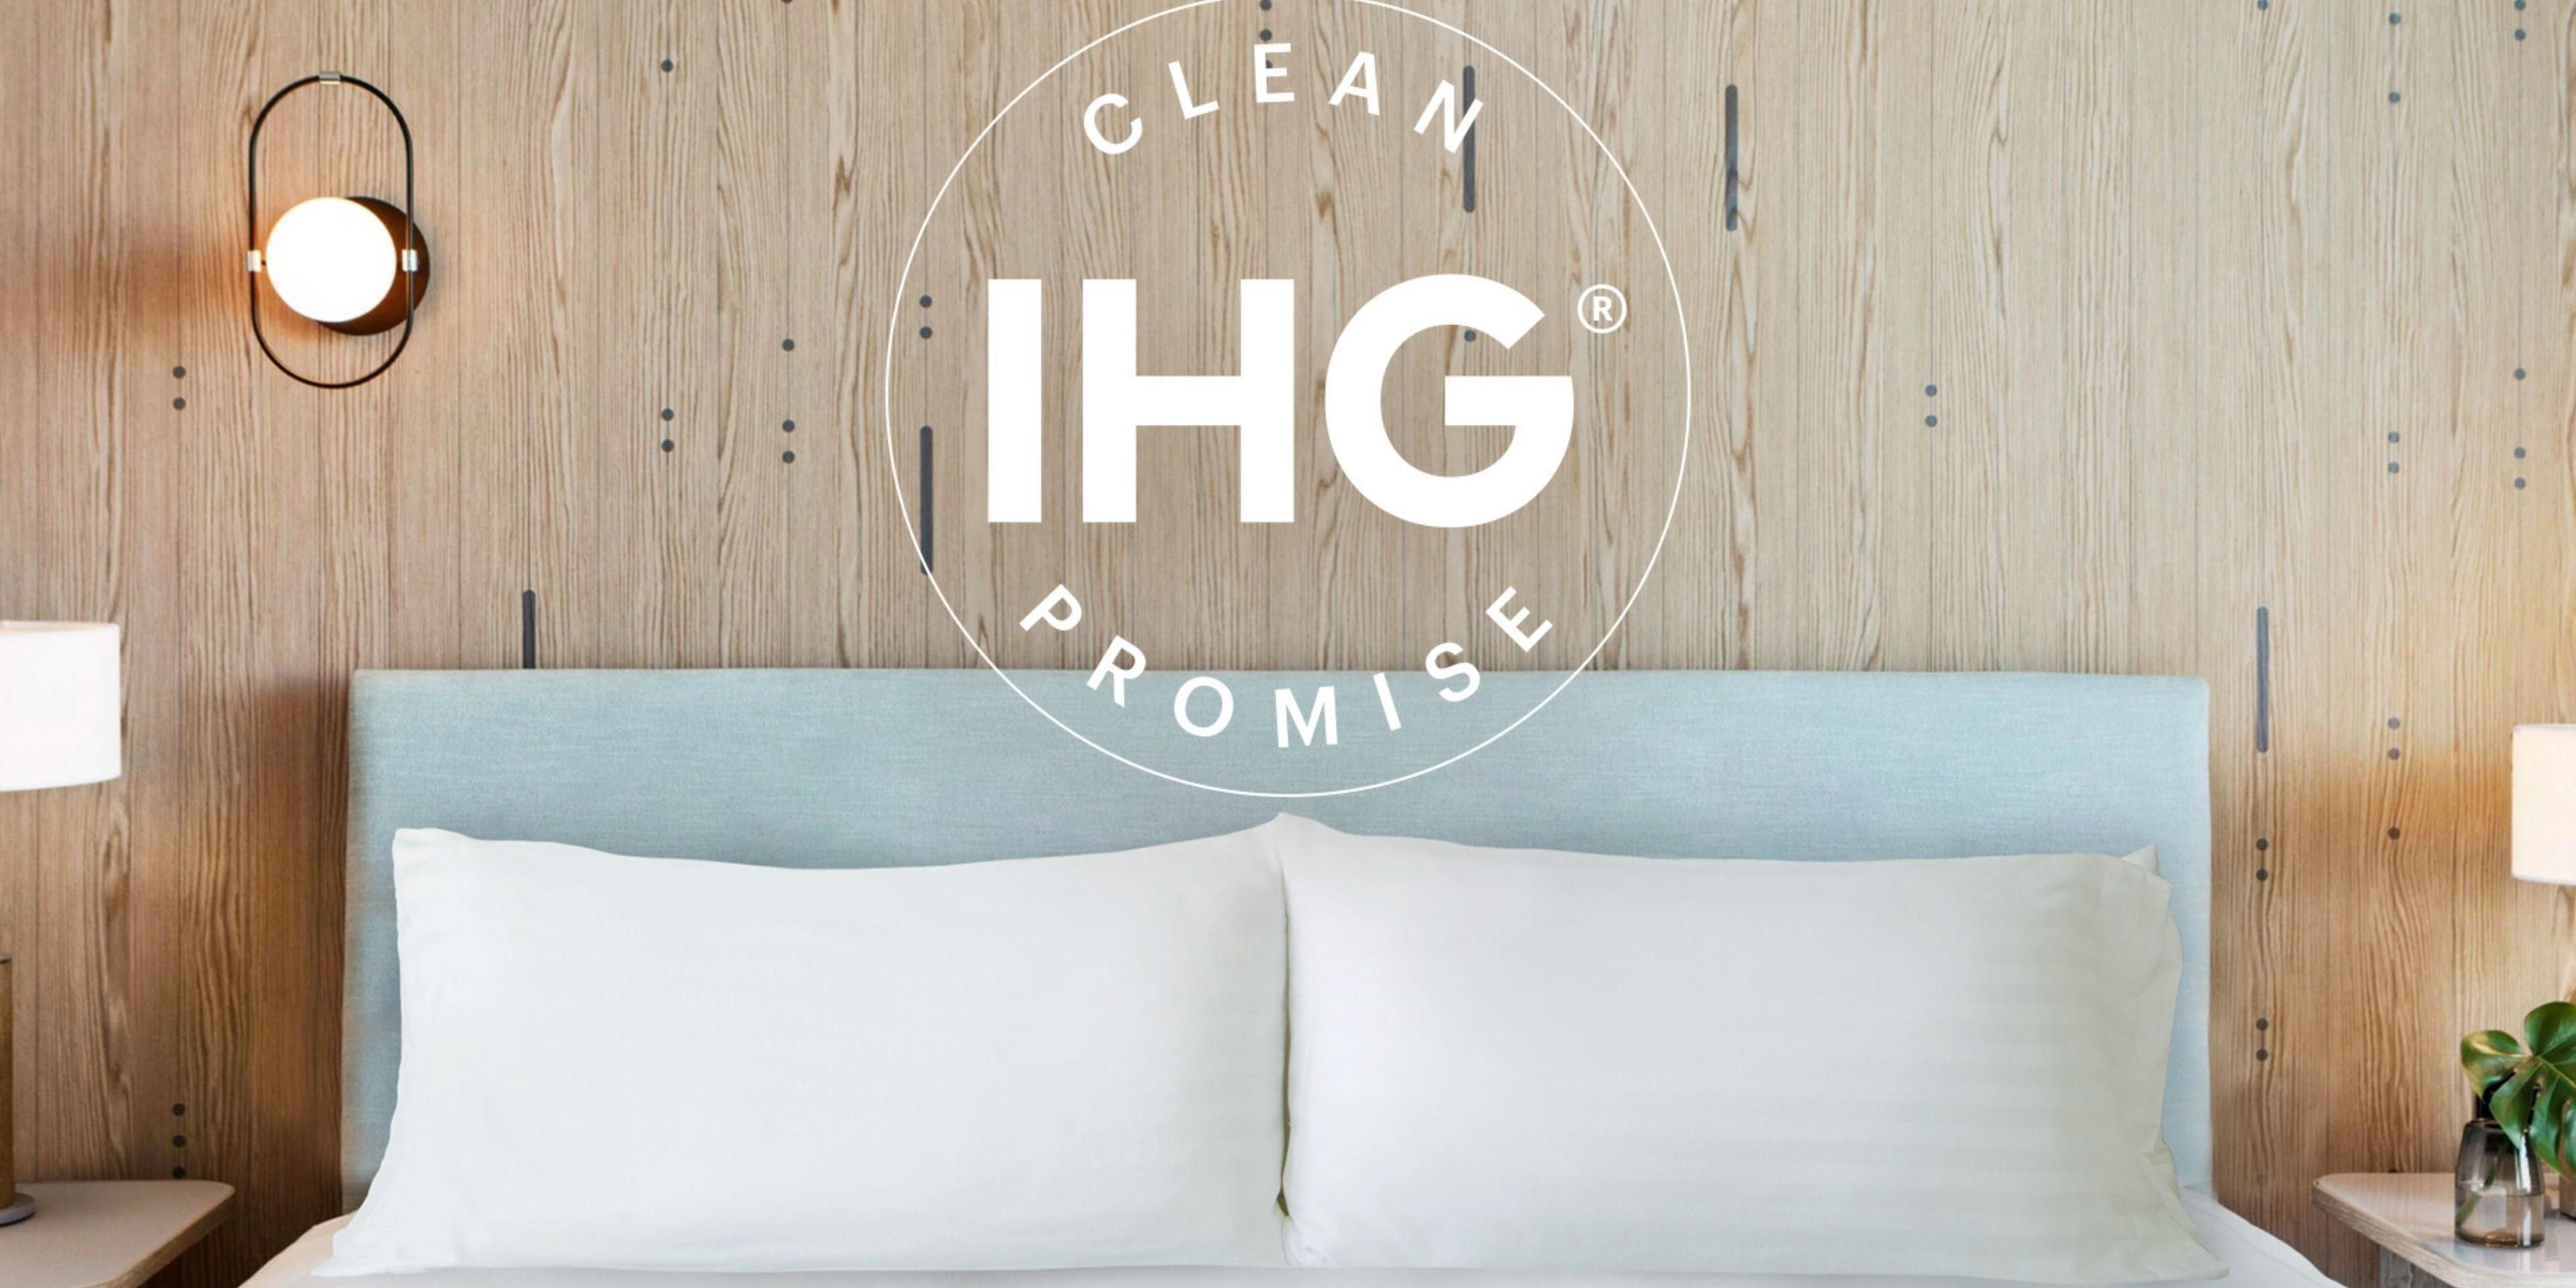 As the world adjusts to new travel norms and expectations, we’re enhancing the experience for you – our hotel guests – by redefining cleanliness and supporting your wellbeing throughout your stay. IHG Way of Clean already includes deep cleaning with hospital-grade disinfectants, and guests can expect to see evolved procedures throughout the hotel.